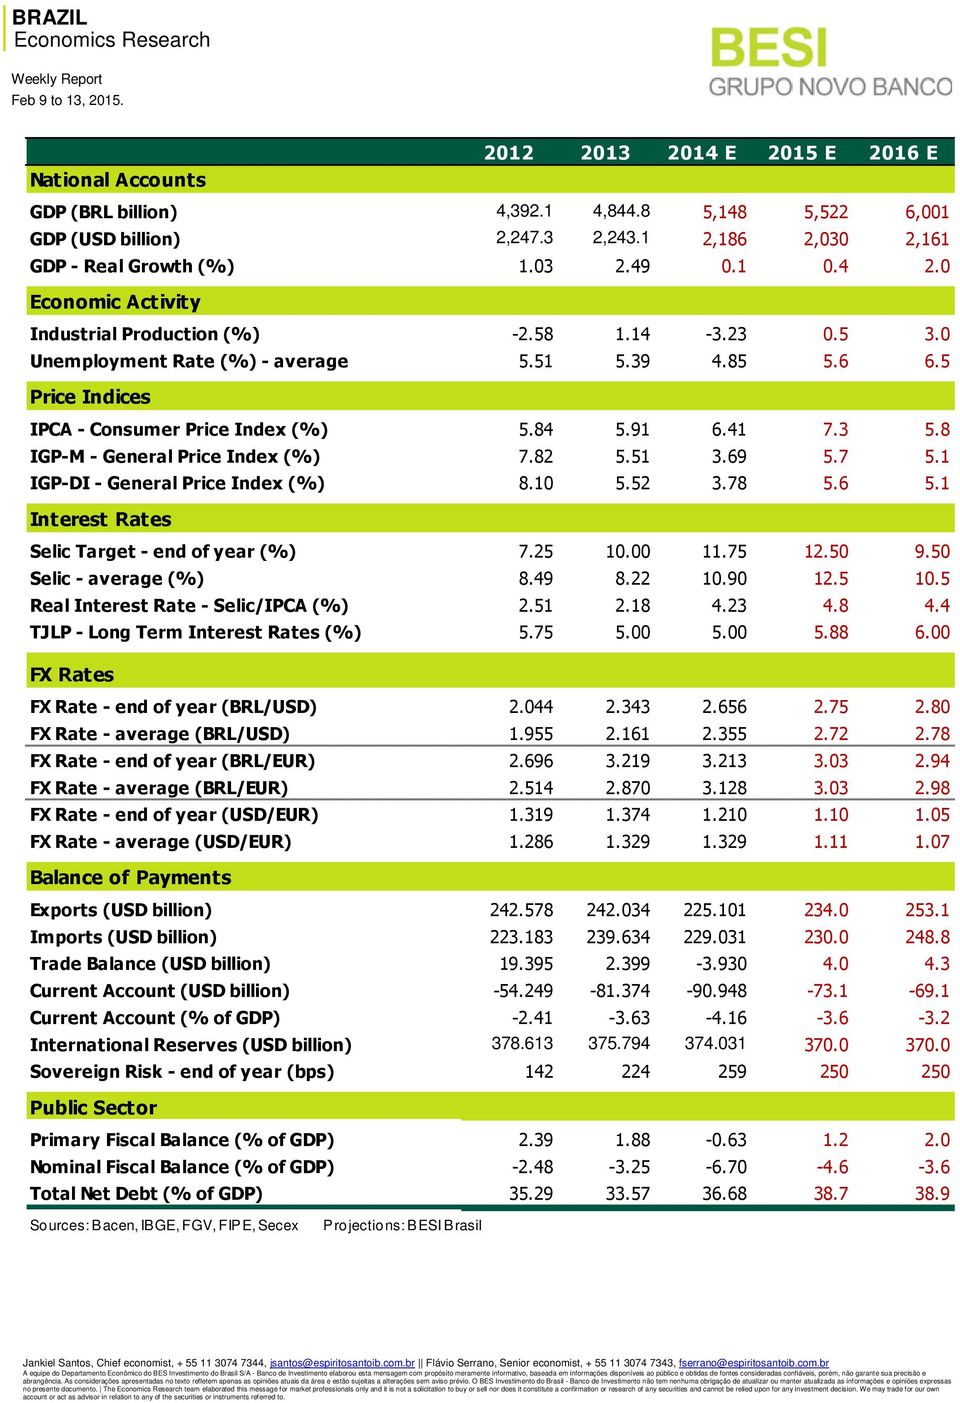 8 IGP-M - General Price Index (%) 7.82 5.51 3.69 5.7 5.1 IGP-DI - General Price Index (%) 8.10 5.52 3.78 5.6 5.1 Interest Rates Selic Target - end of year (%) 7.25 10.00 11.75 12.50 9.